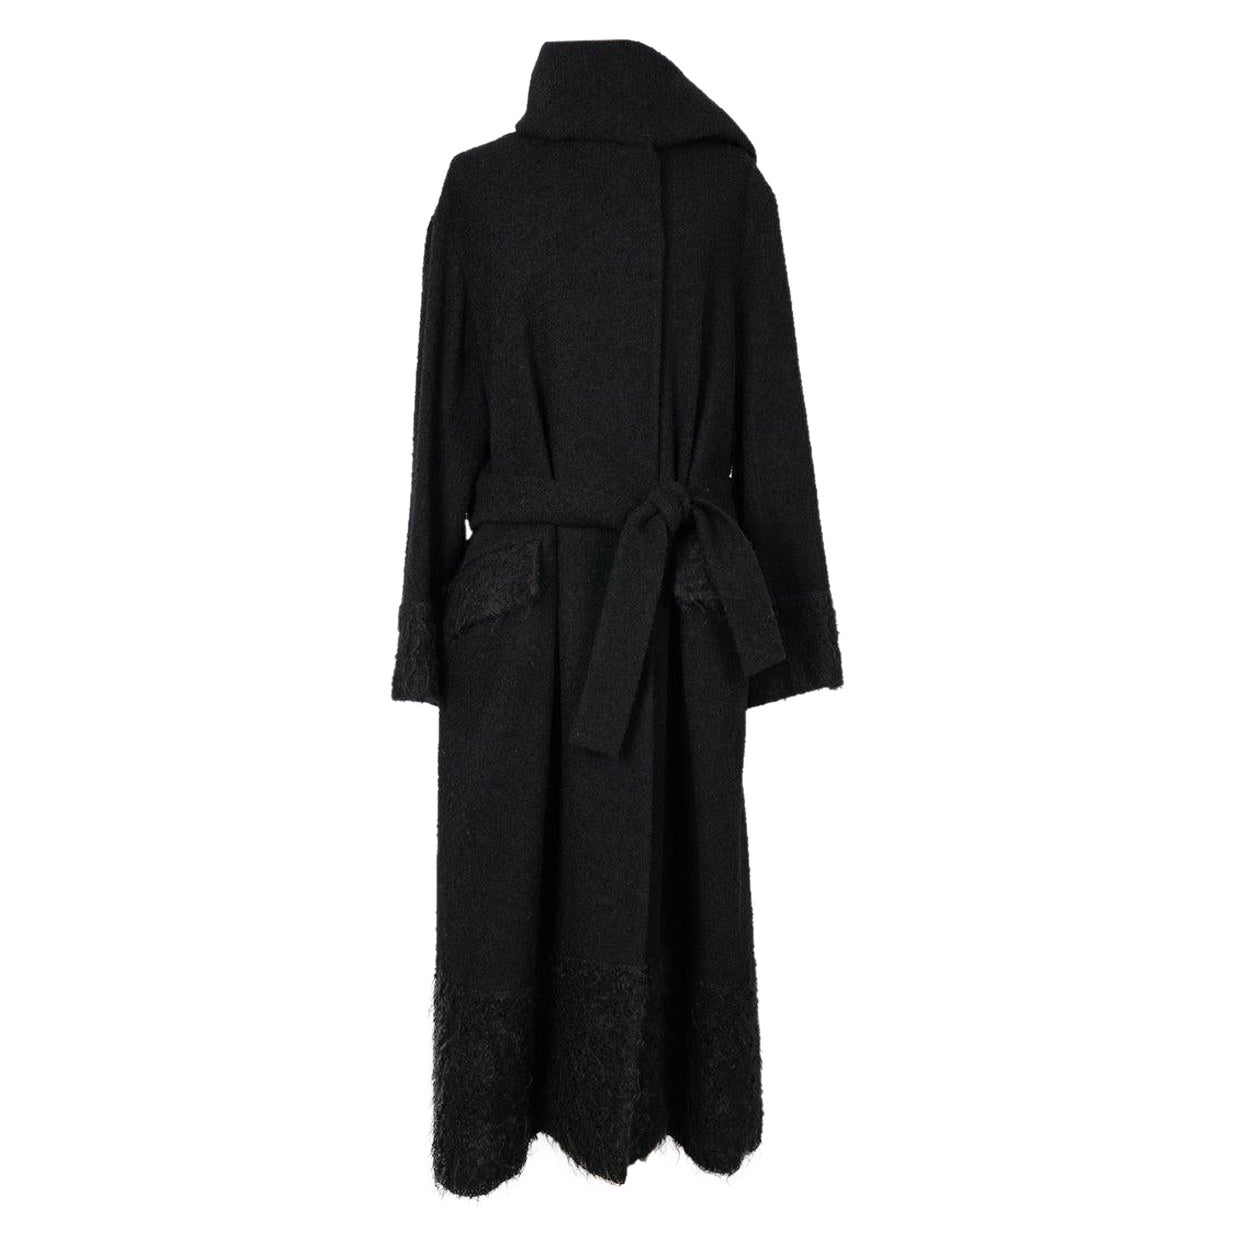 Christian Dior Black Coat with Asymmetrical Collar, 2009 For Sale